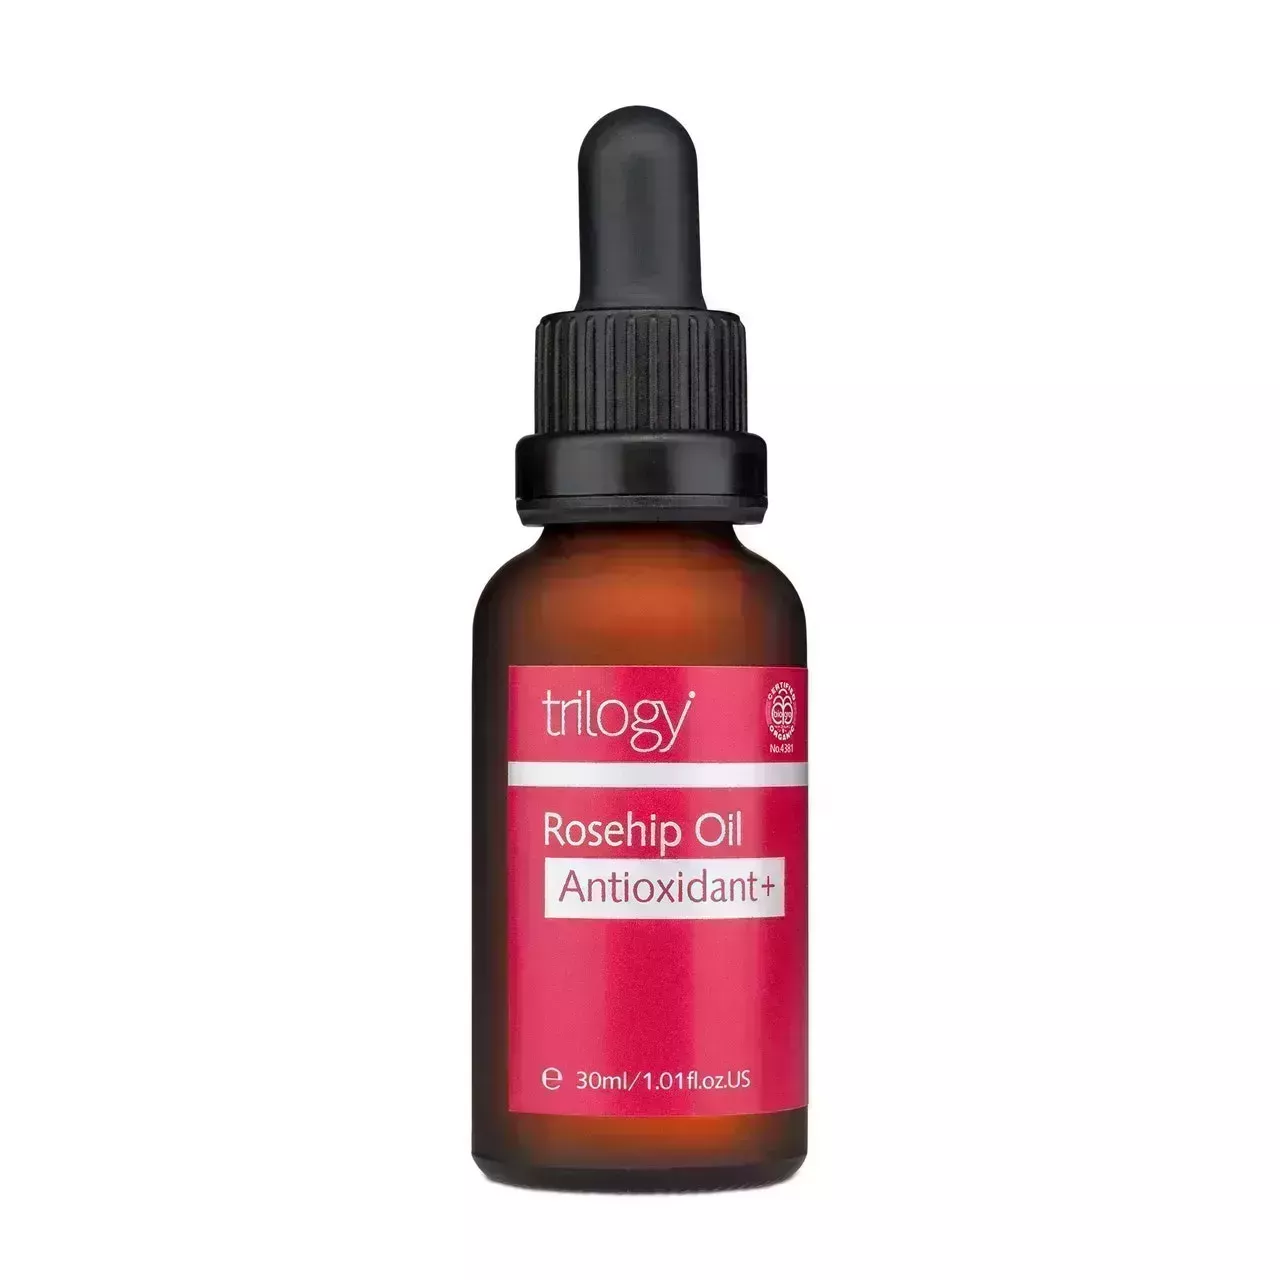 Best Facial Oils of 2020: Dark brown and red bottle of Trilogy Rosehip Oil Antioxidant+ on white background